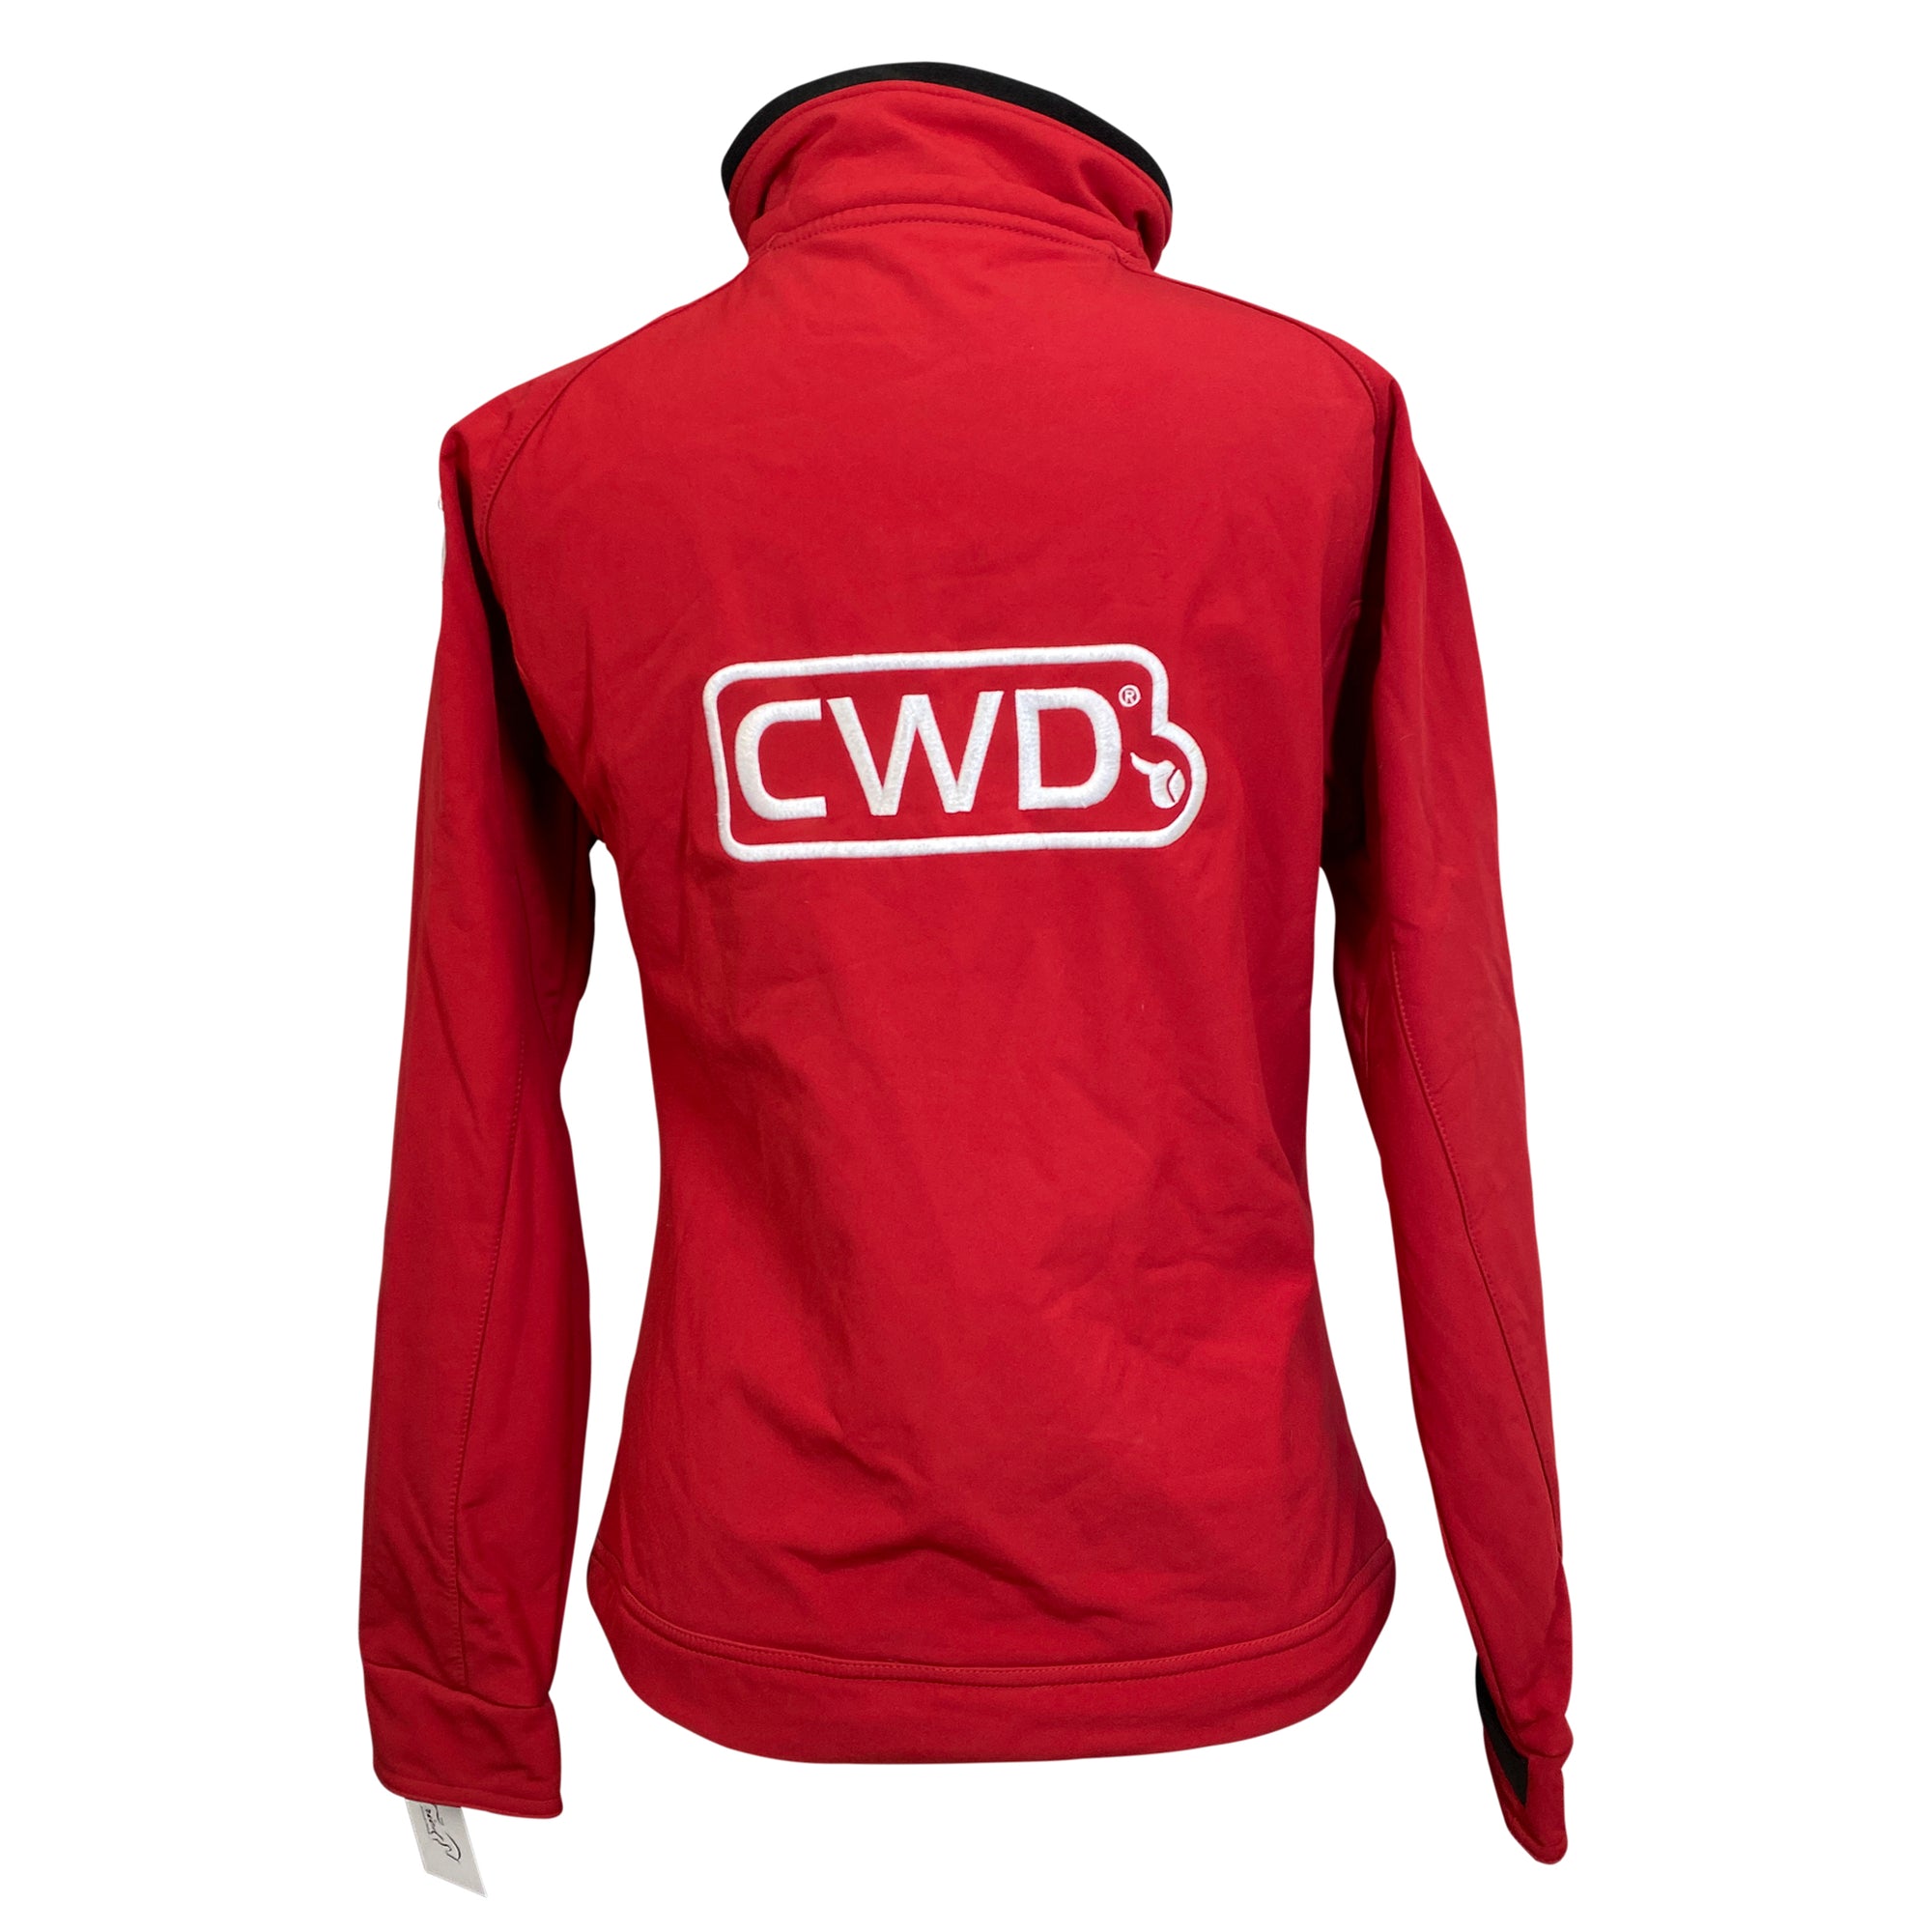 CWD Softshell Jacket in Red 